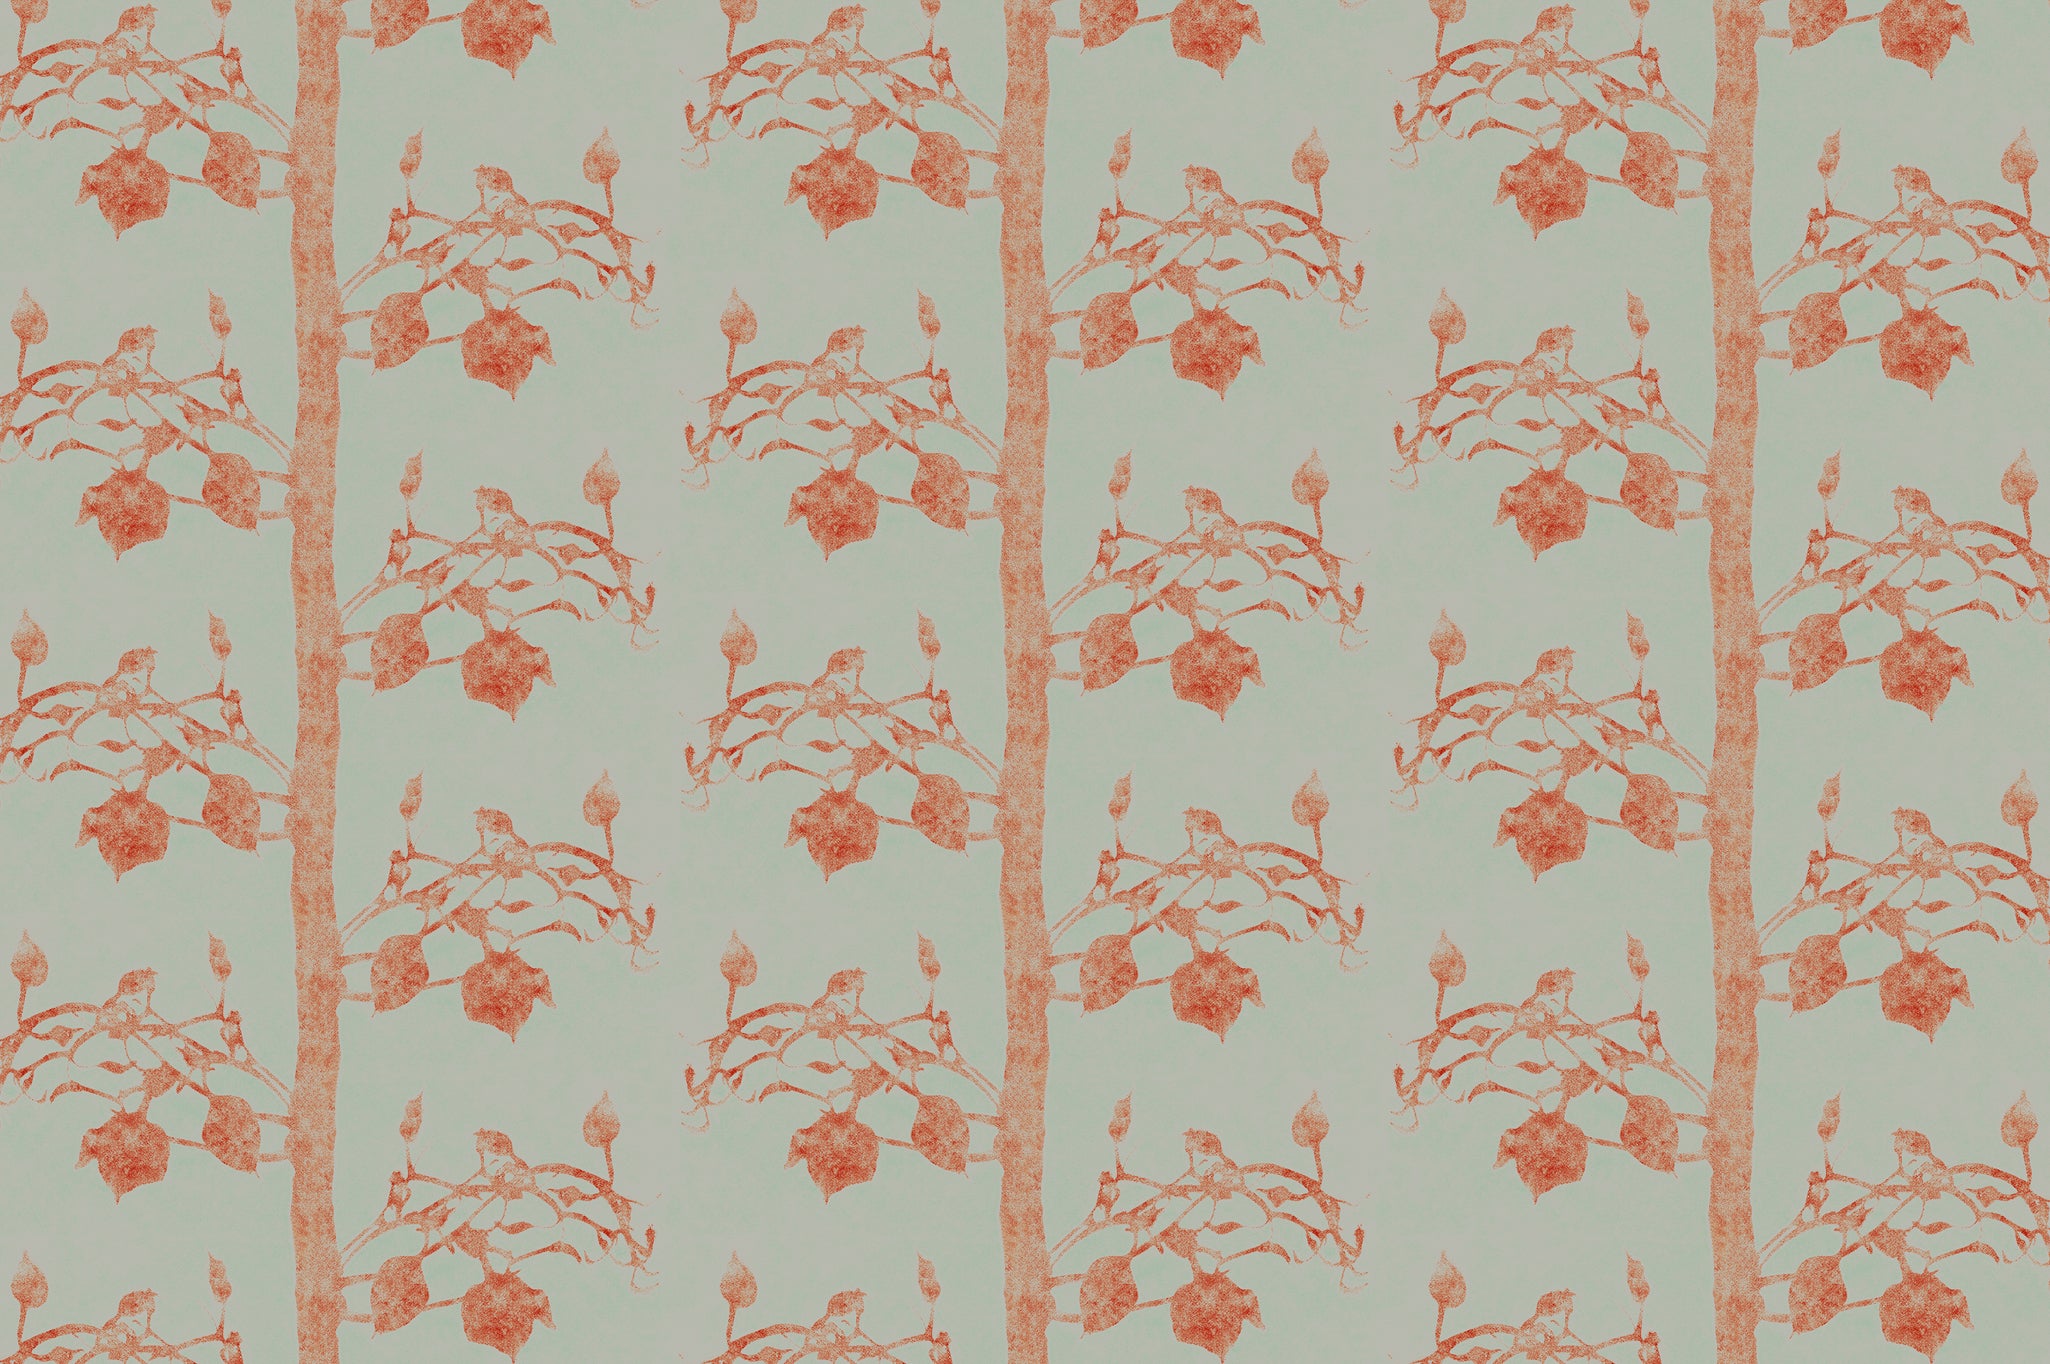 Detail of fabric in a linear tree and leaf print in burnt orange on a light green field.